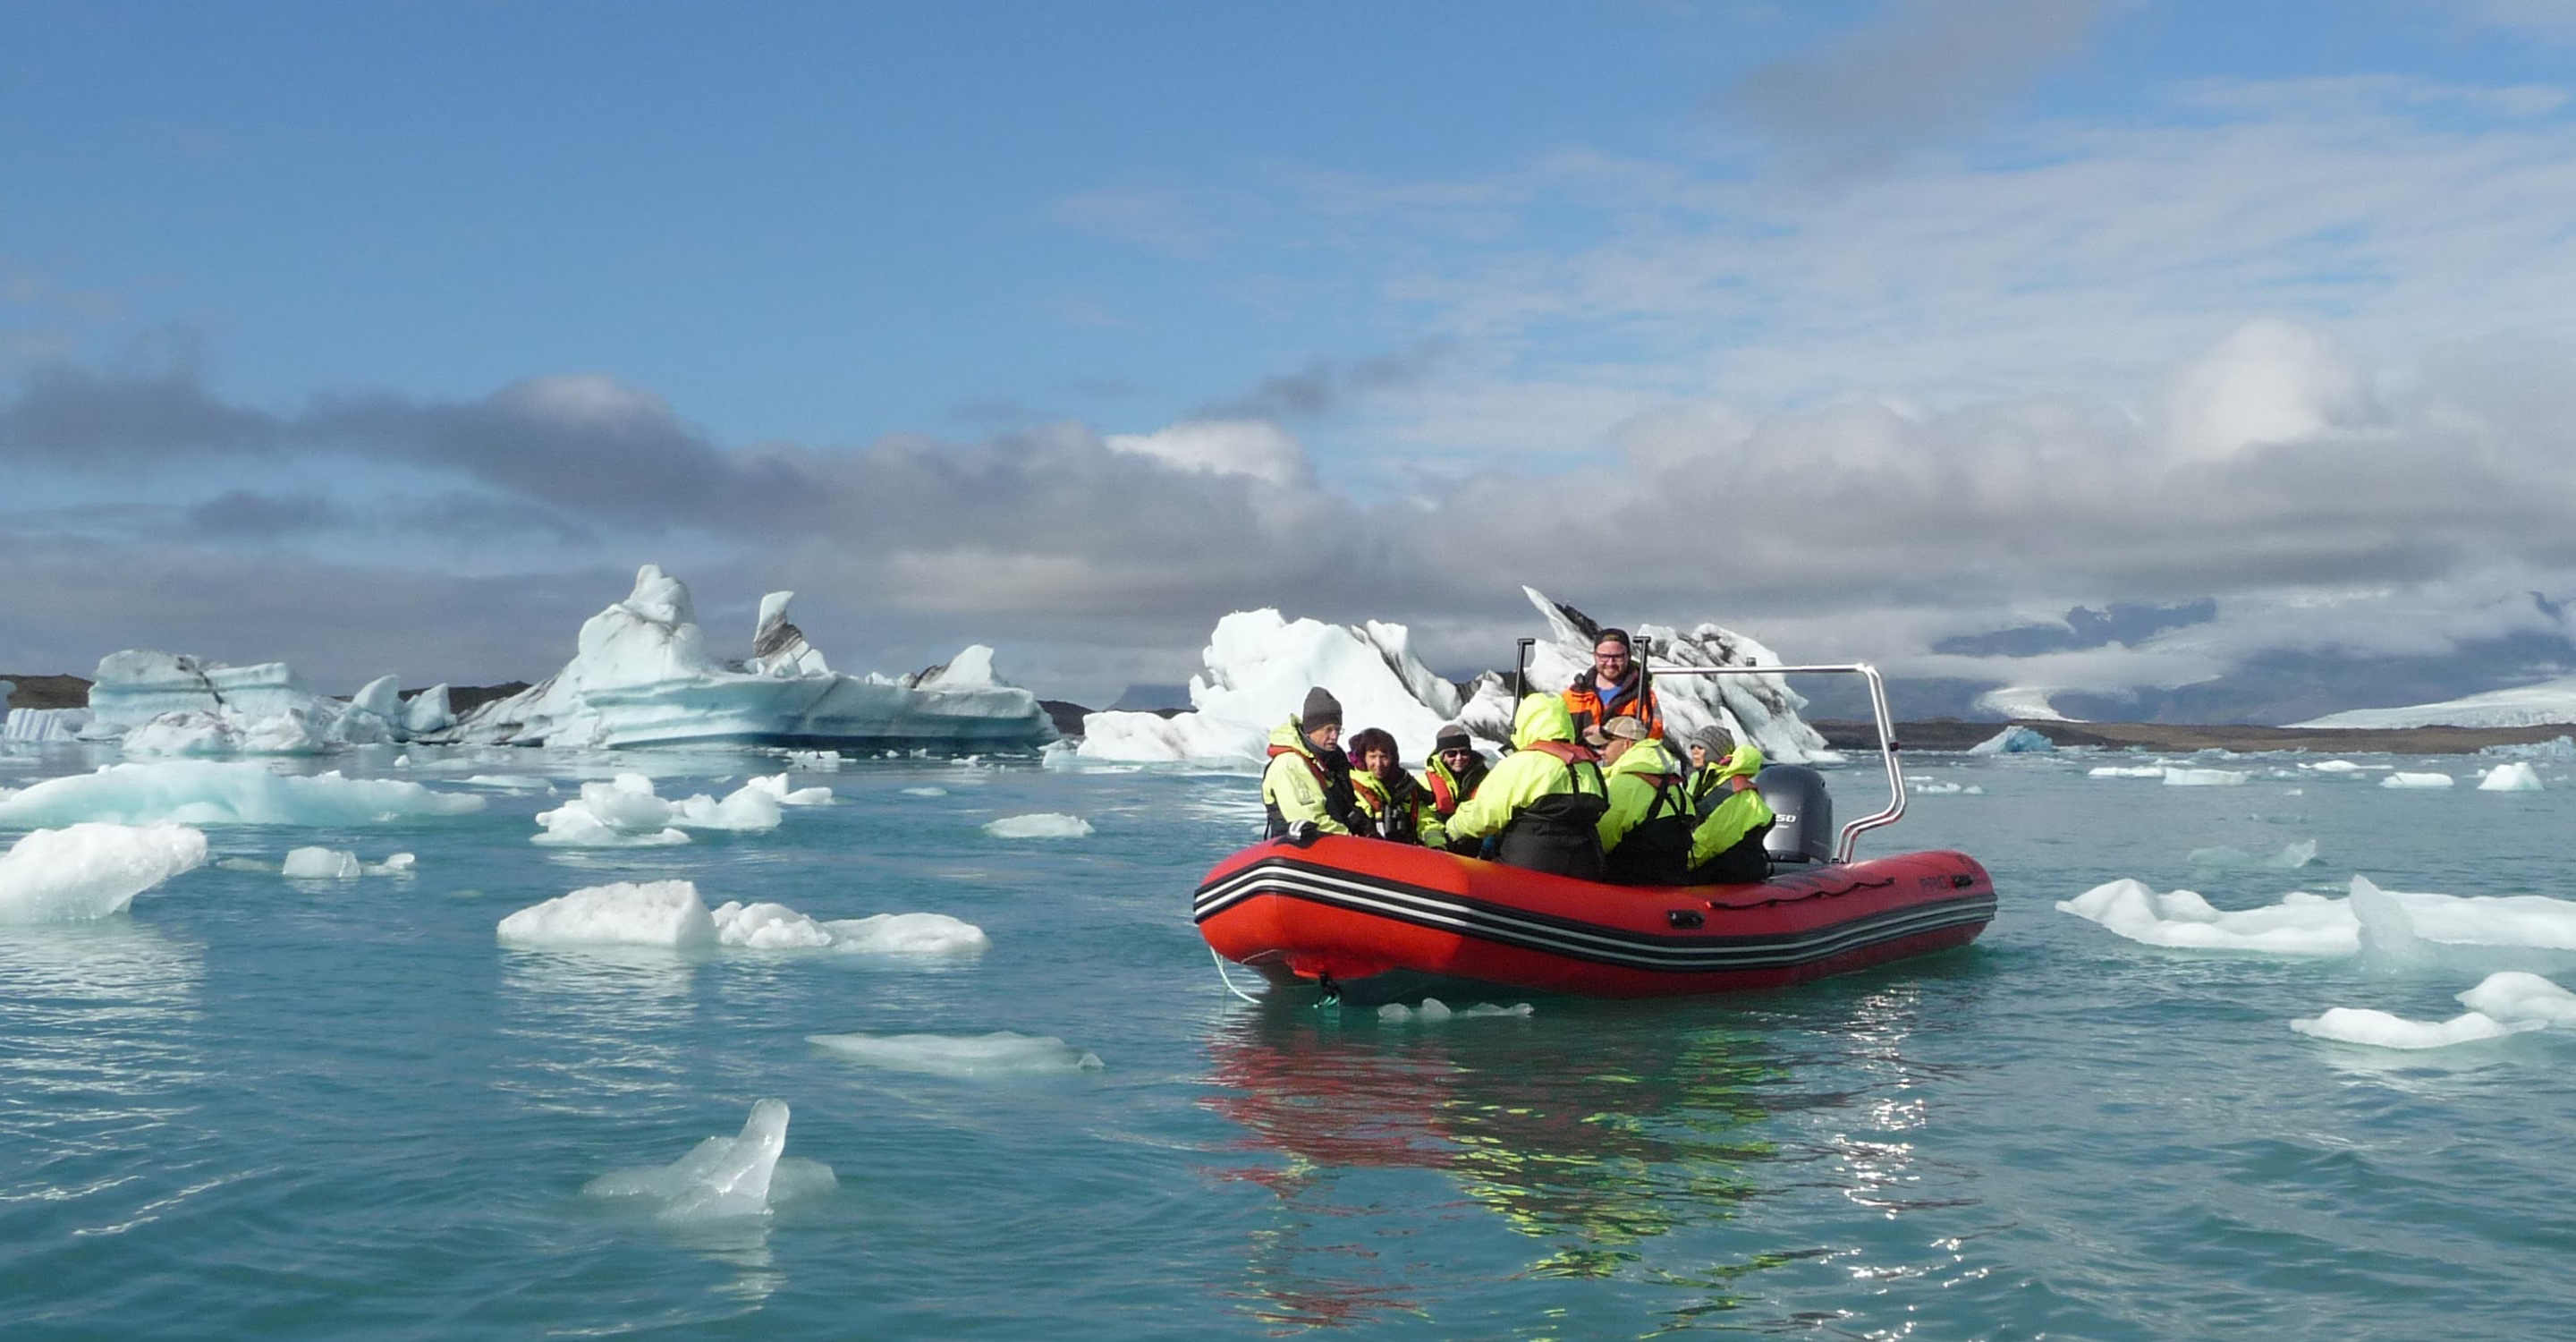 Travelers on a private zodiac tour of Fjallsarlon Glacier Lagoon surrounded by icebergs, Iceland, Europe